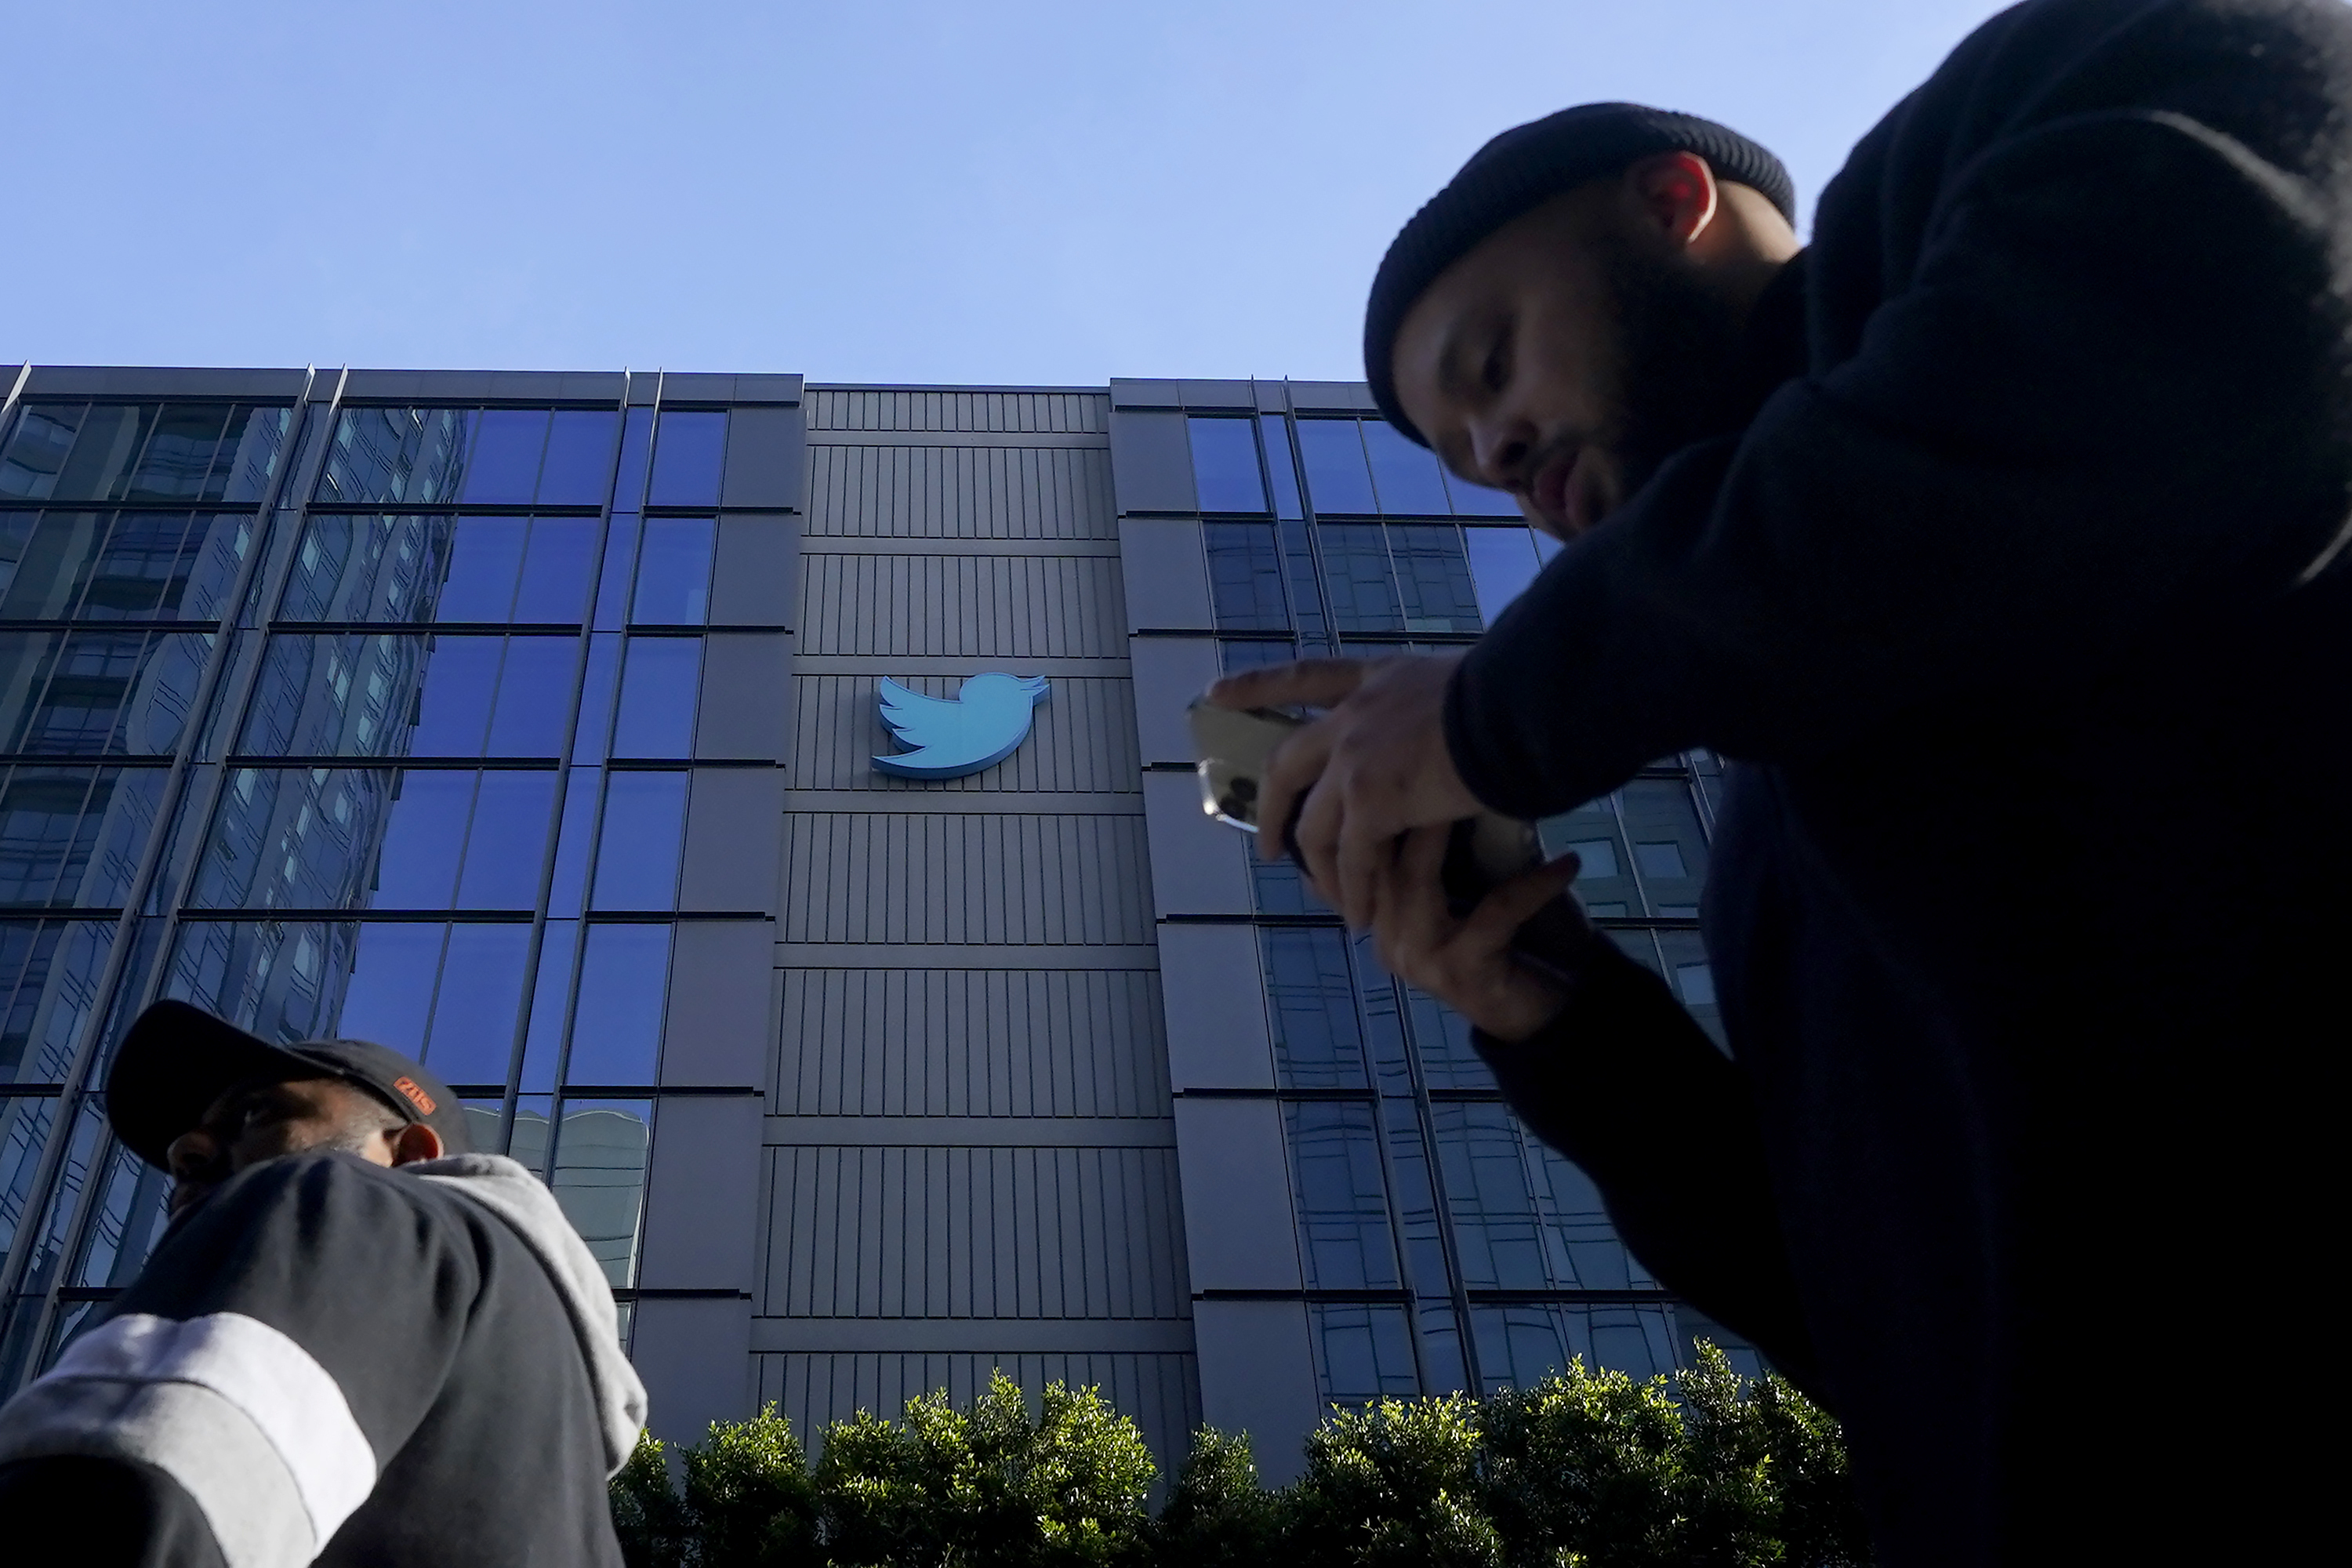 Twitter Begins Rolling Out $7.99 Subscription Fee for Blue Check Verification